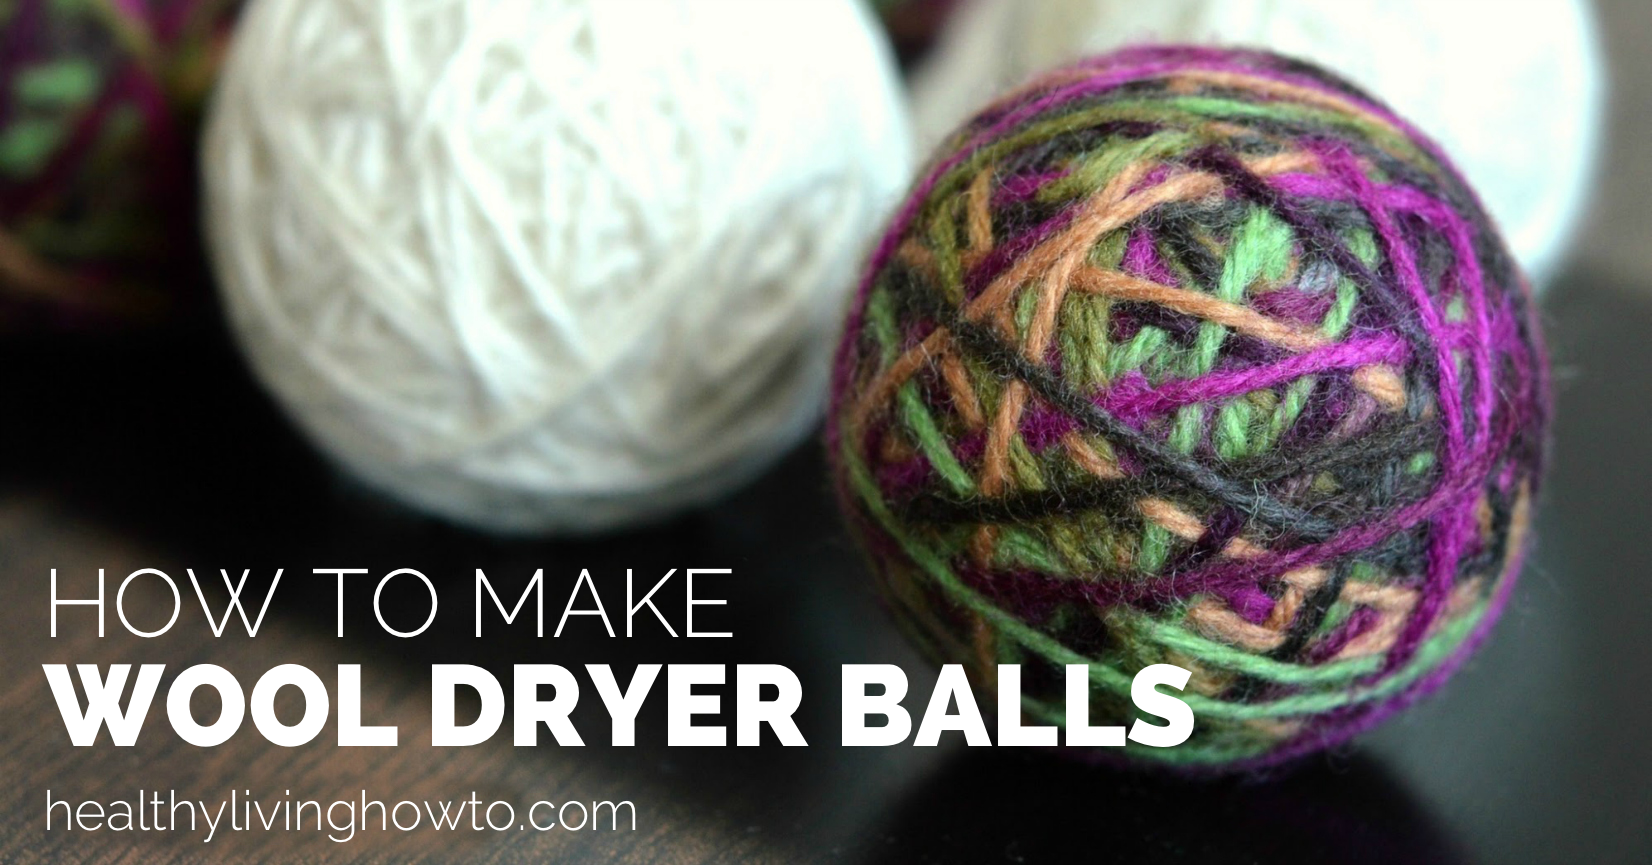 How To Make Wool Dryer Balls